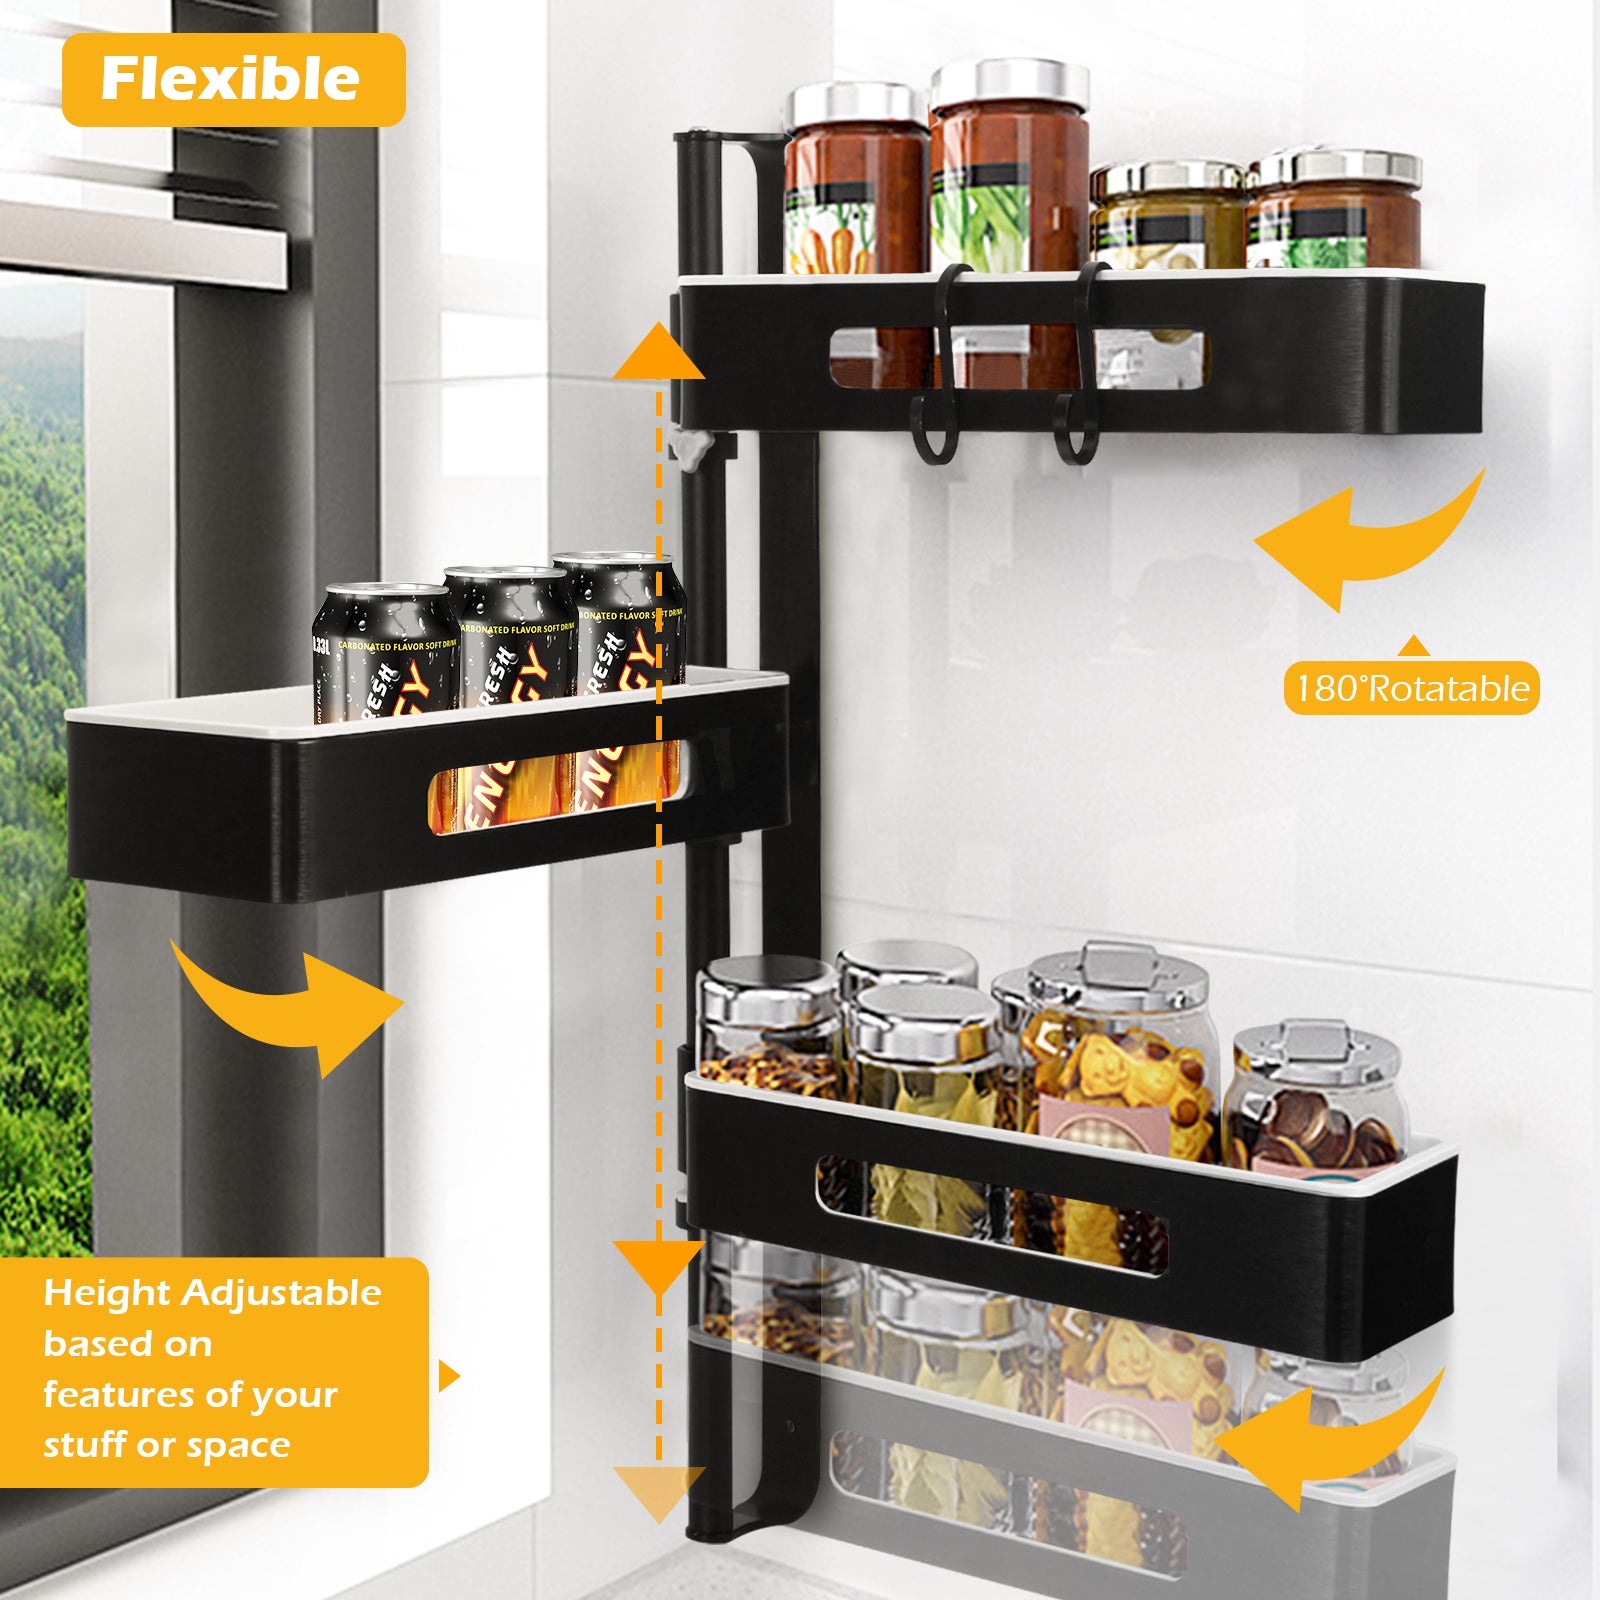 Todeco-3-Tier-Height-Adjustable-Kitchen-Storage-Spice-Rack-Punch-Free-Bathroom-Storage-Shelf-Space-Saving-Organization-for-Living-Room-Balcony